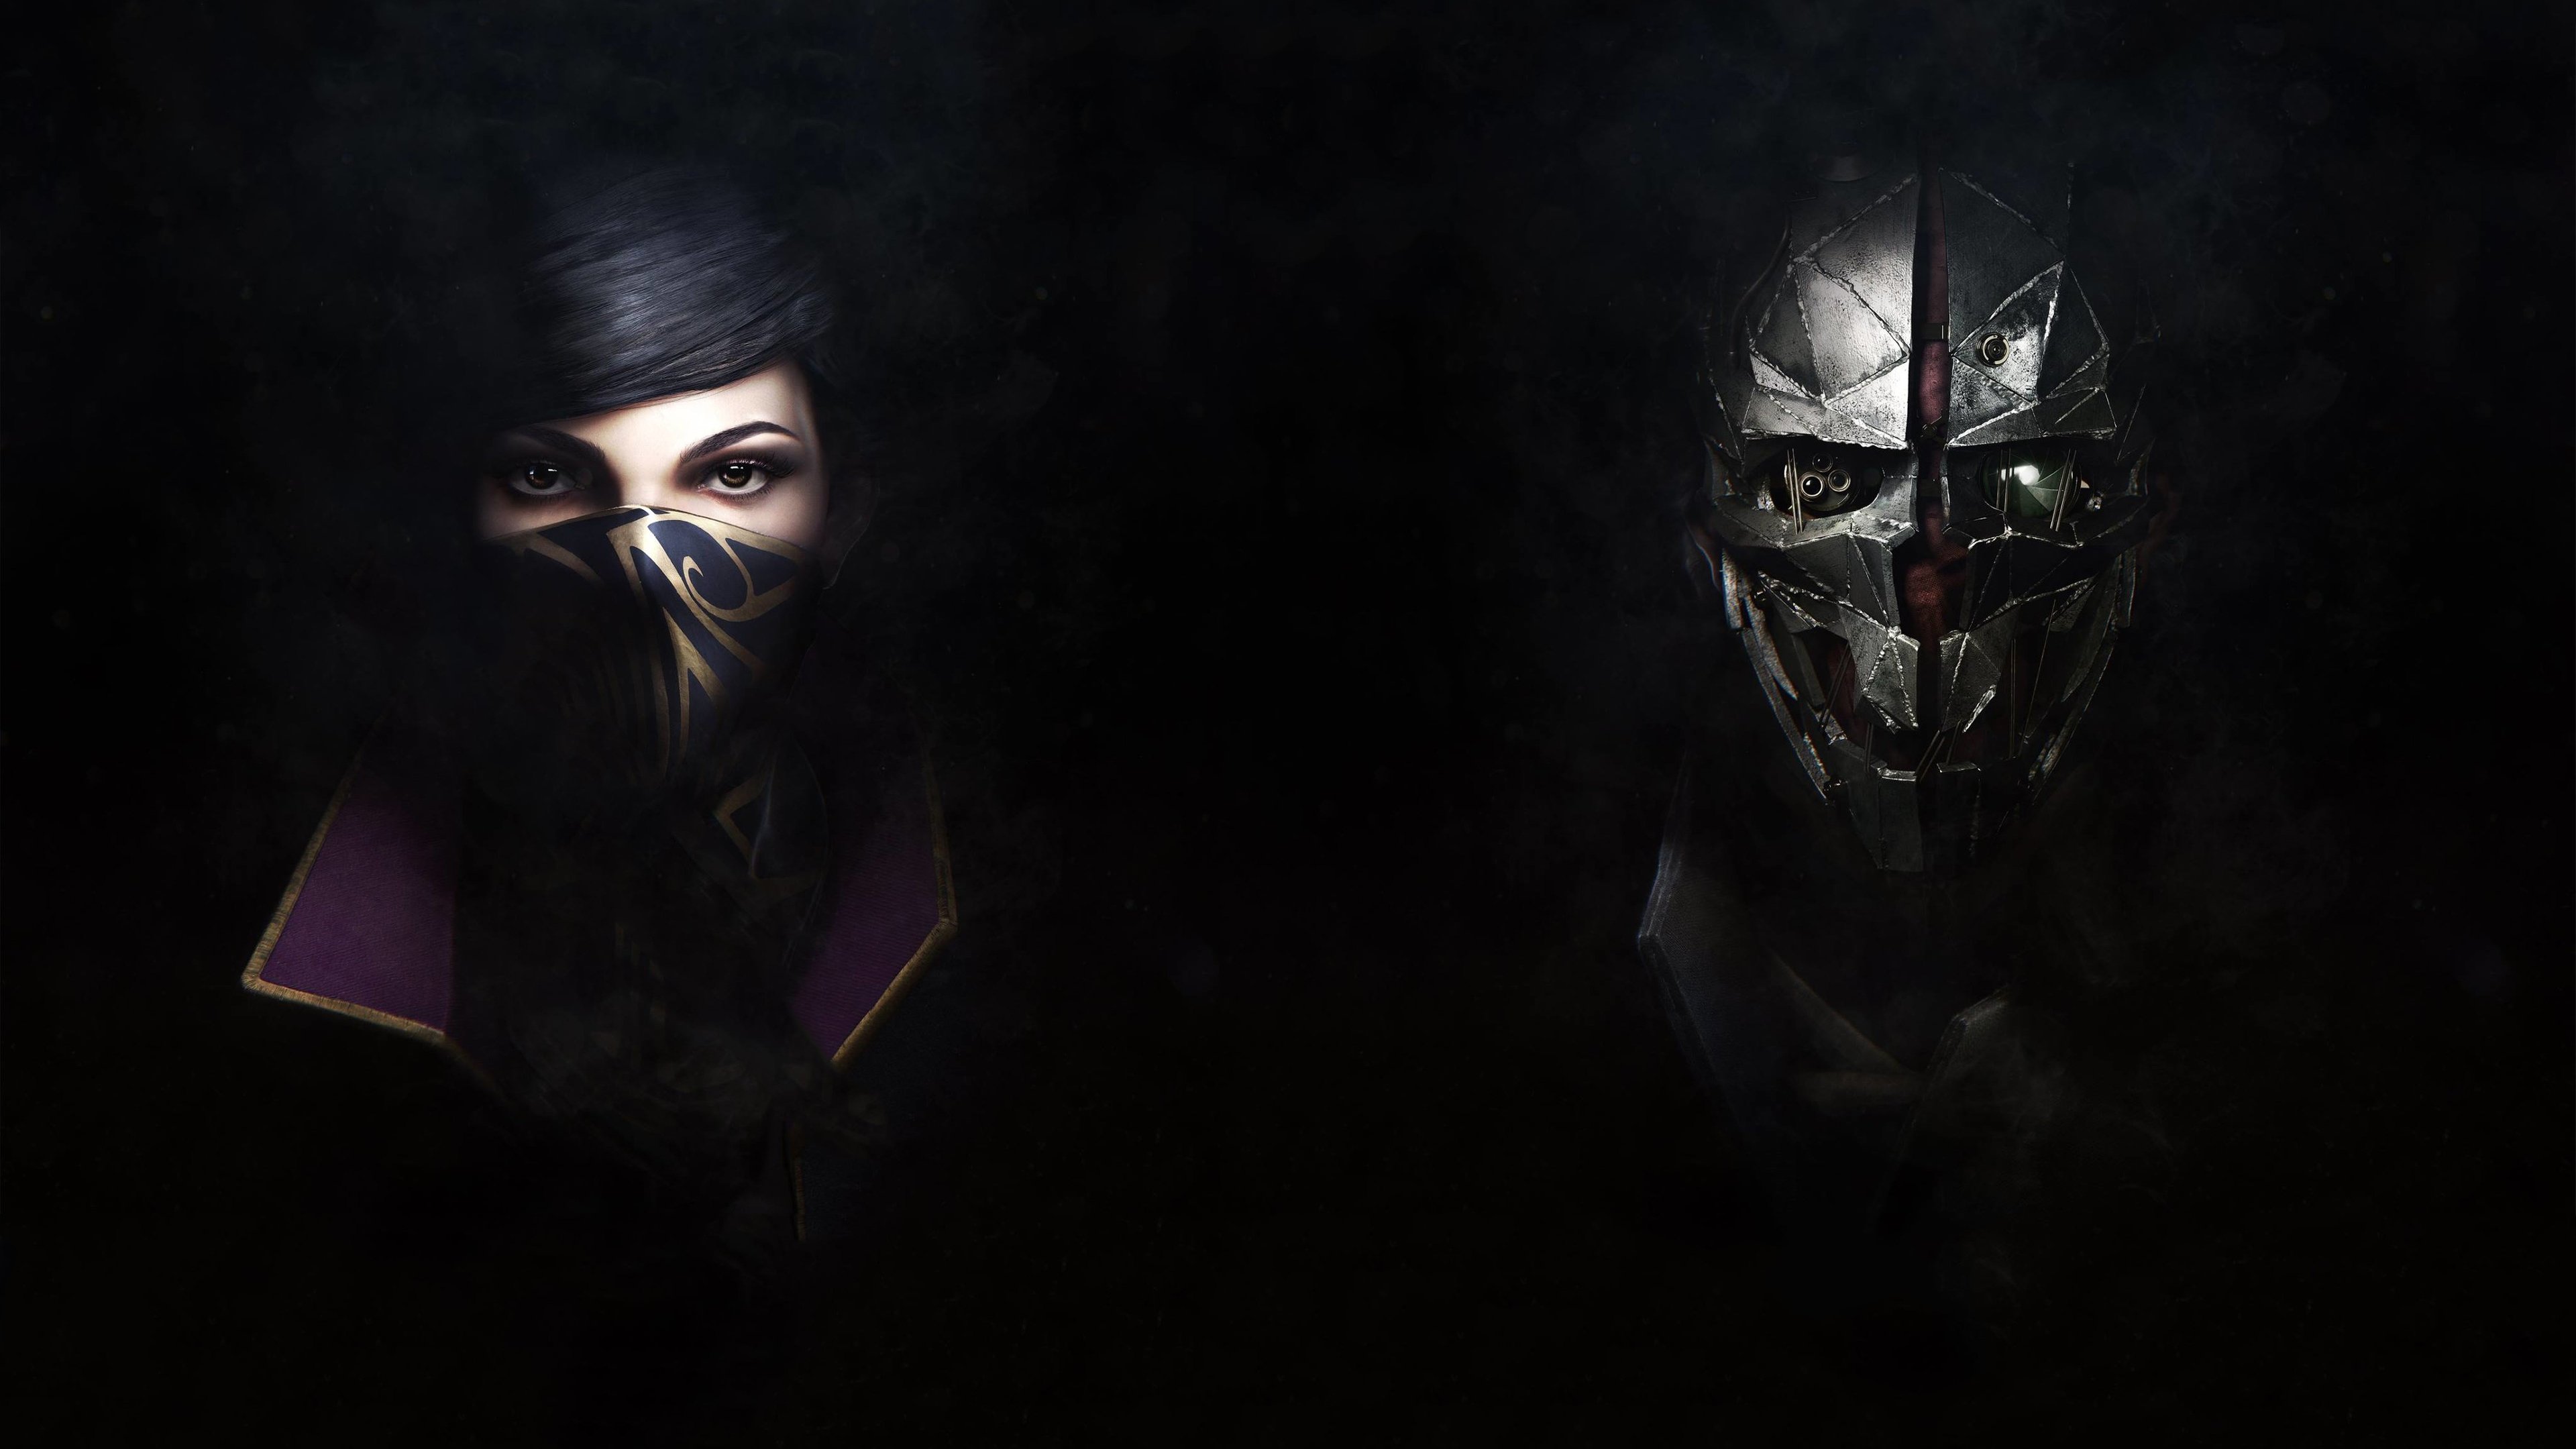 dishonored 2 pc review